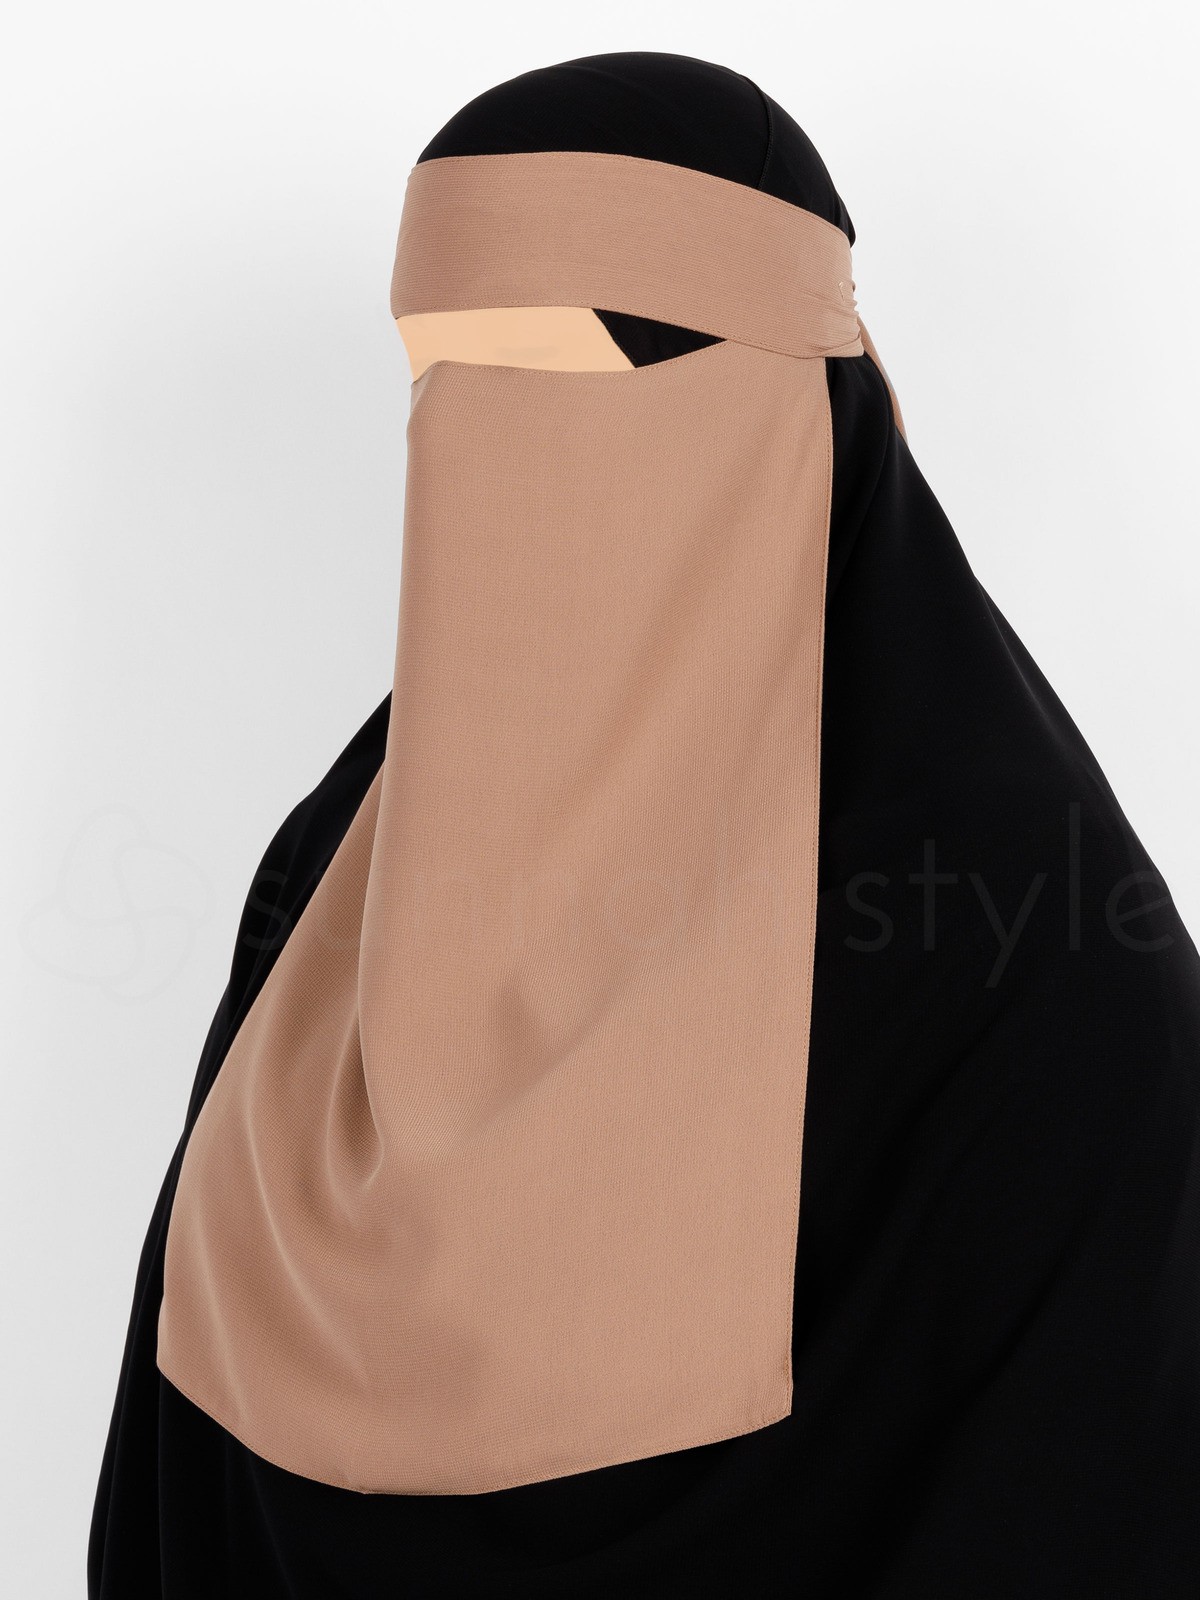 Sunnah Style - Pull-Down One Layer Niqab (Toffee)